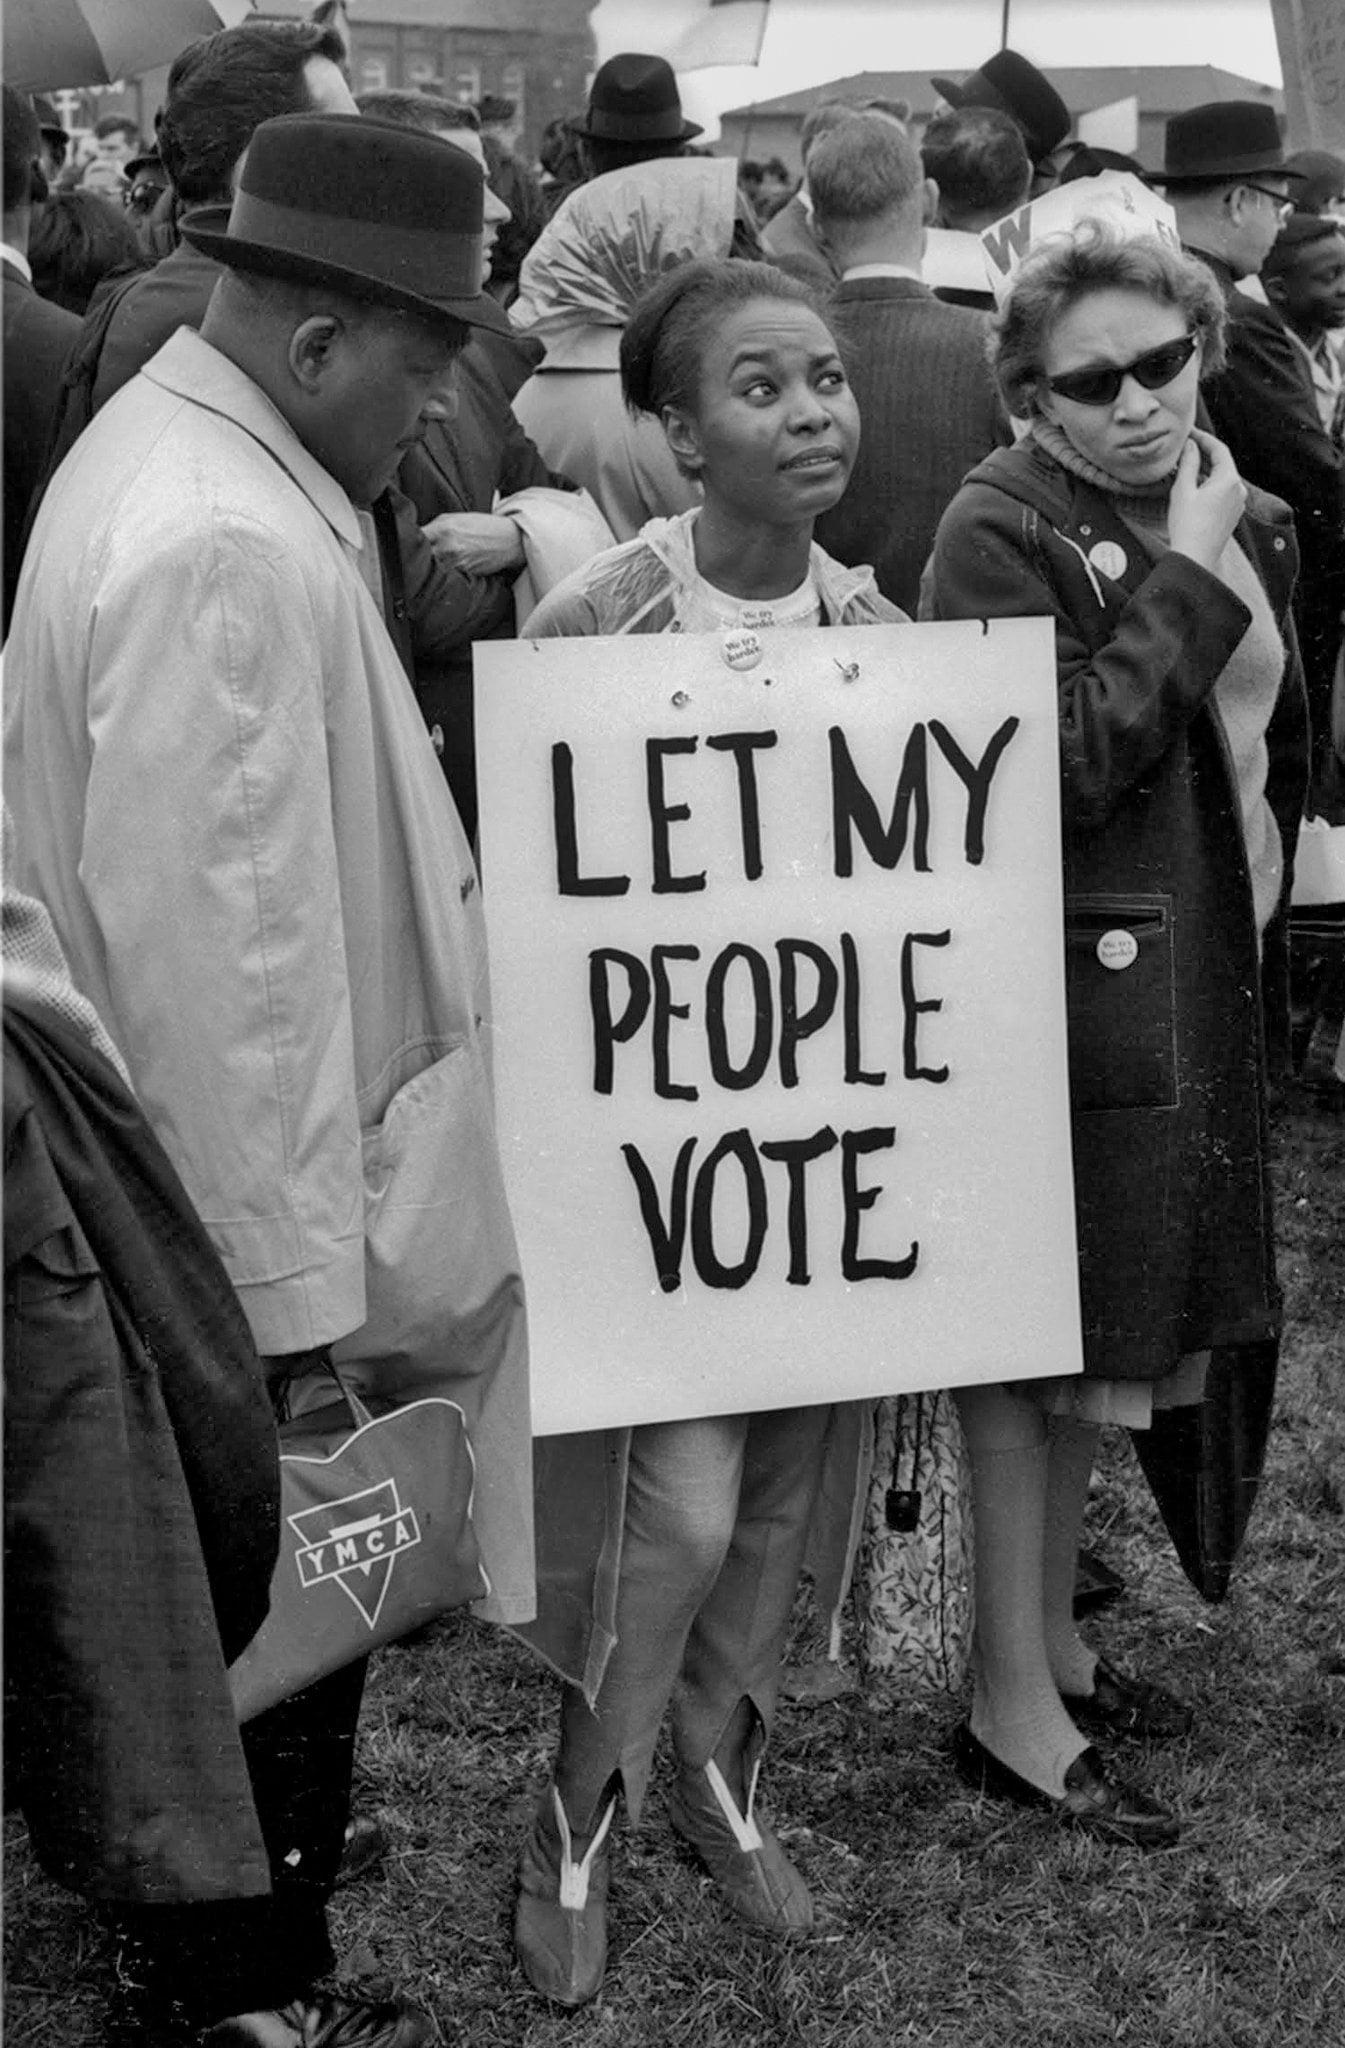 The Freedom to Vote Act Would Boost Voter Participation and Fulfill the Goals of the March on Selma